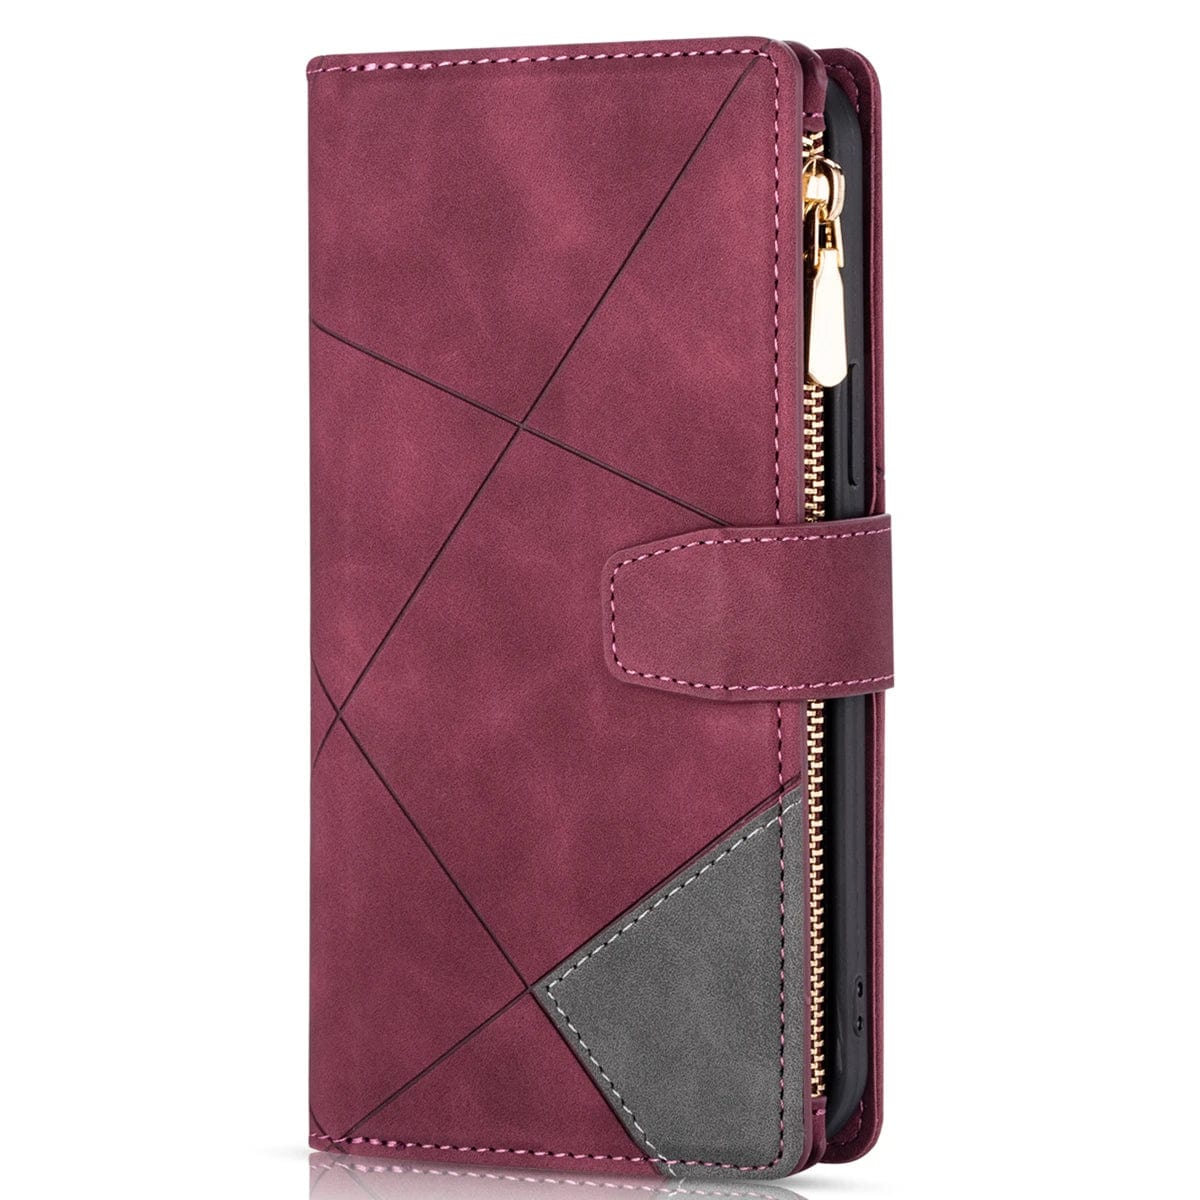 Multi-Cards Zipper Leather Wallet Case For Samsung Galaxy A Series Galaxy A12 / Wine red Multi-Cards Zipper Leather Wallet Case For Samsung Galaxy A Series Styleeo